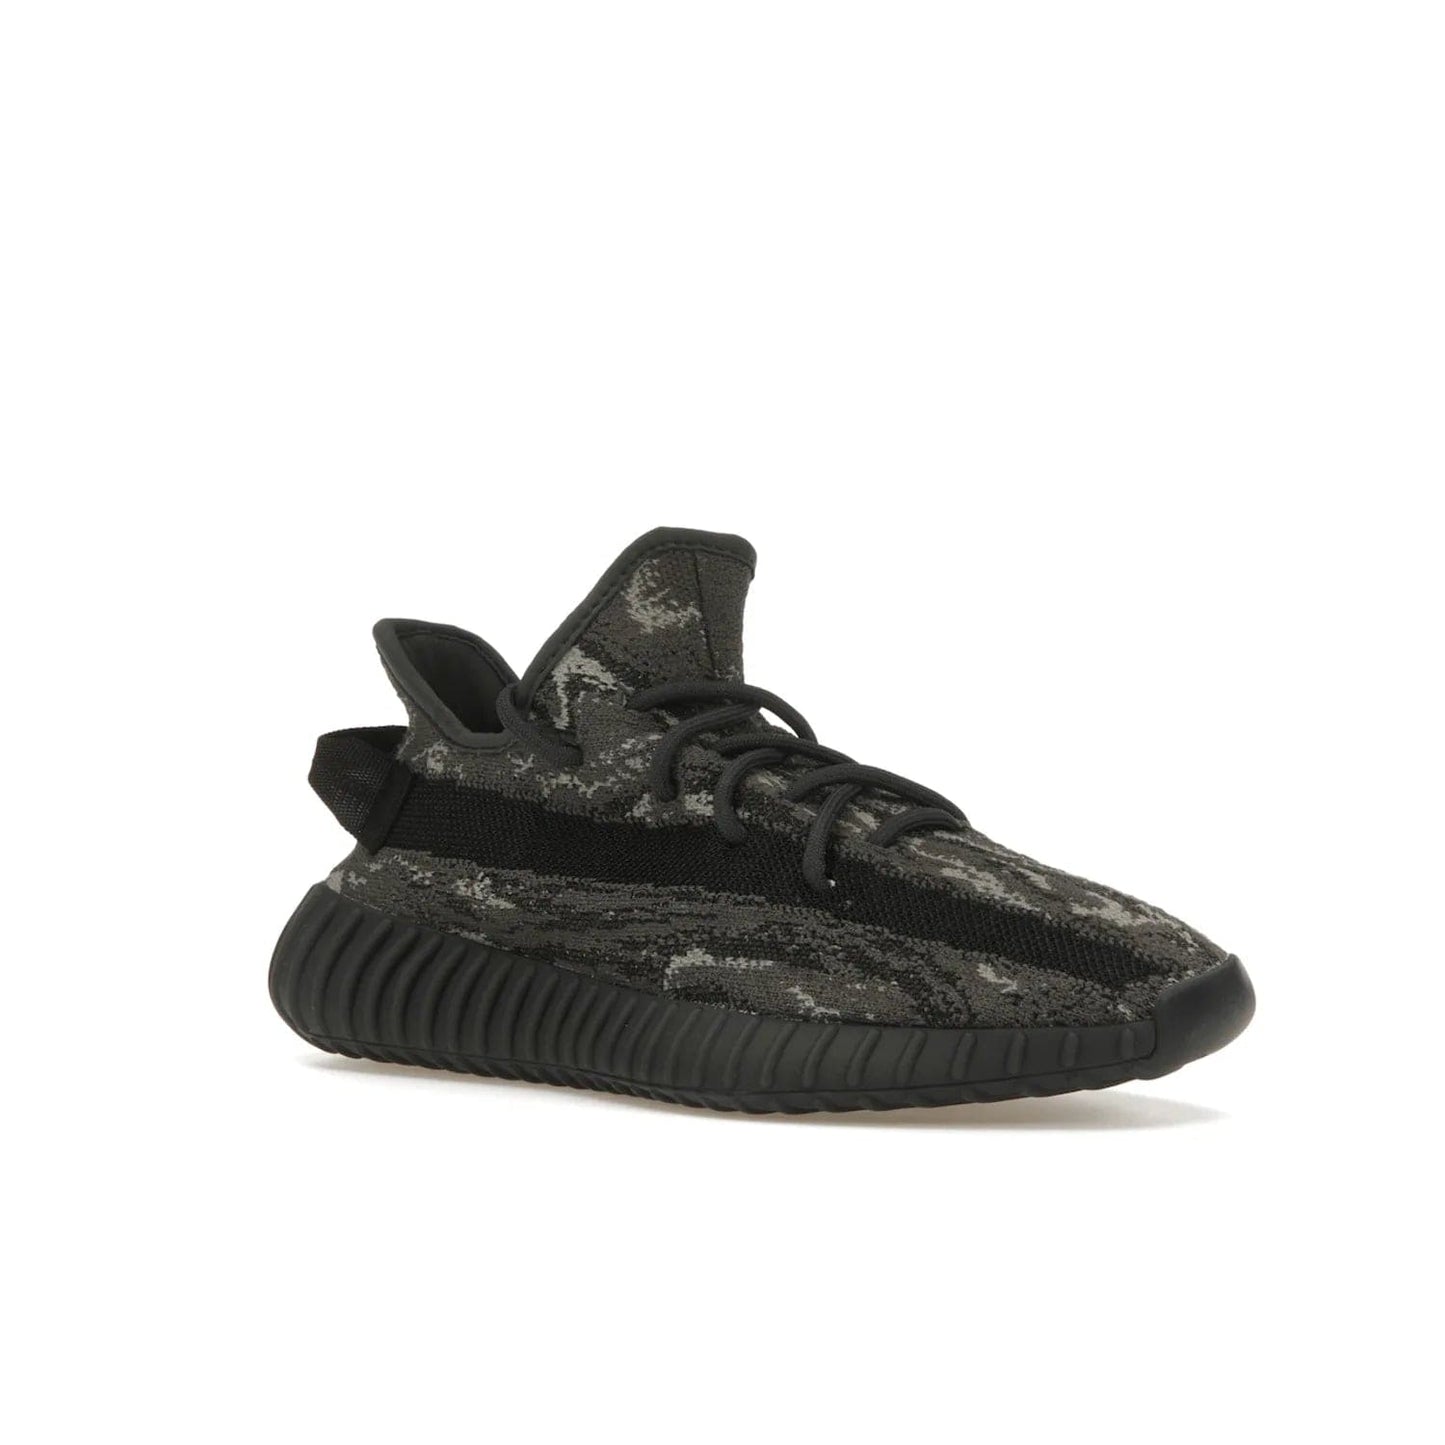 adidas Yeezy Boost 350 V2 MX Dark Salt - Image 5 - Only at www.BallersClubKickz.com - ##
The adidas Yeezy Boost 350 V2 MX Dark Salt offers a contemporary look with a signature combination of grey and black hues. Cushioned Boost midsole and side stripe allow for all day wear. Get the perfect fashion-forward addition with this sleek sneaker for $230.